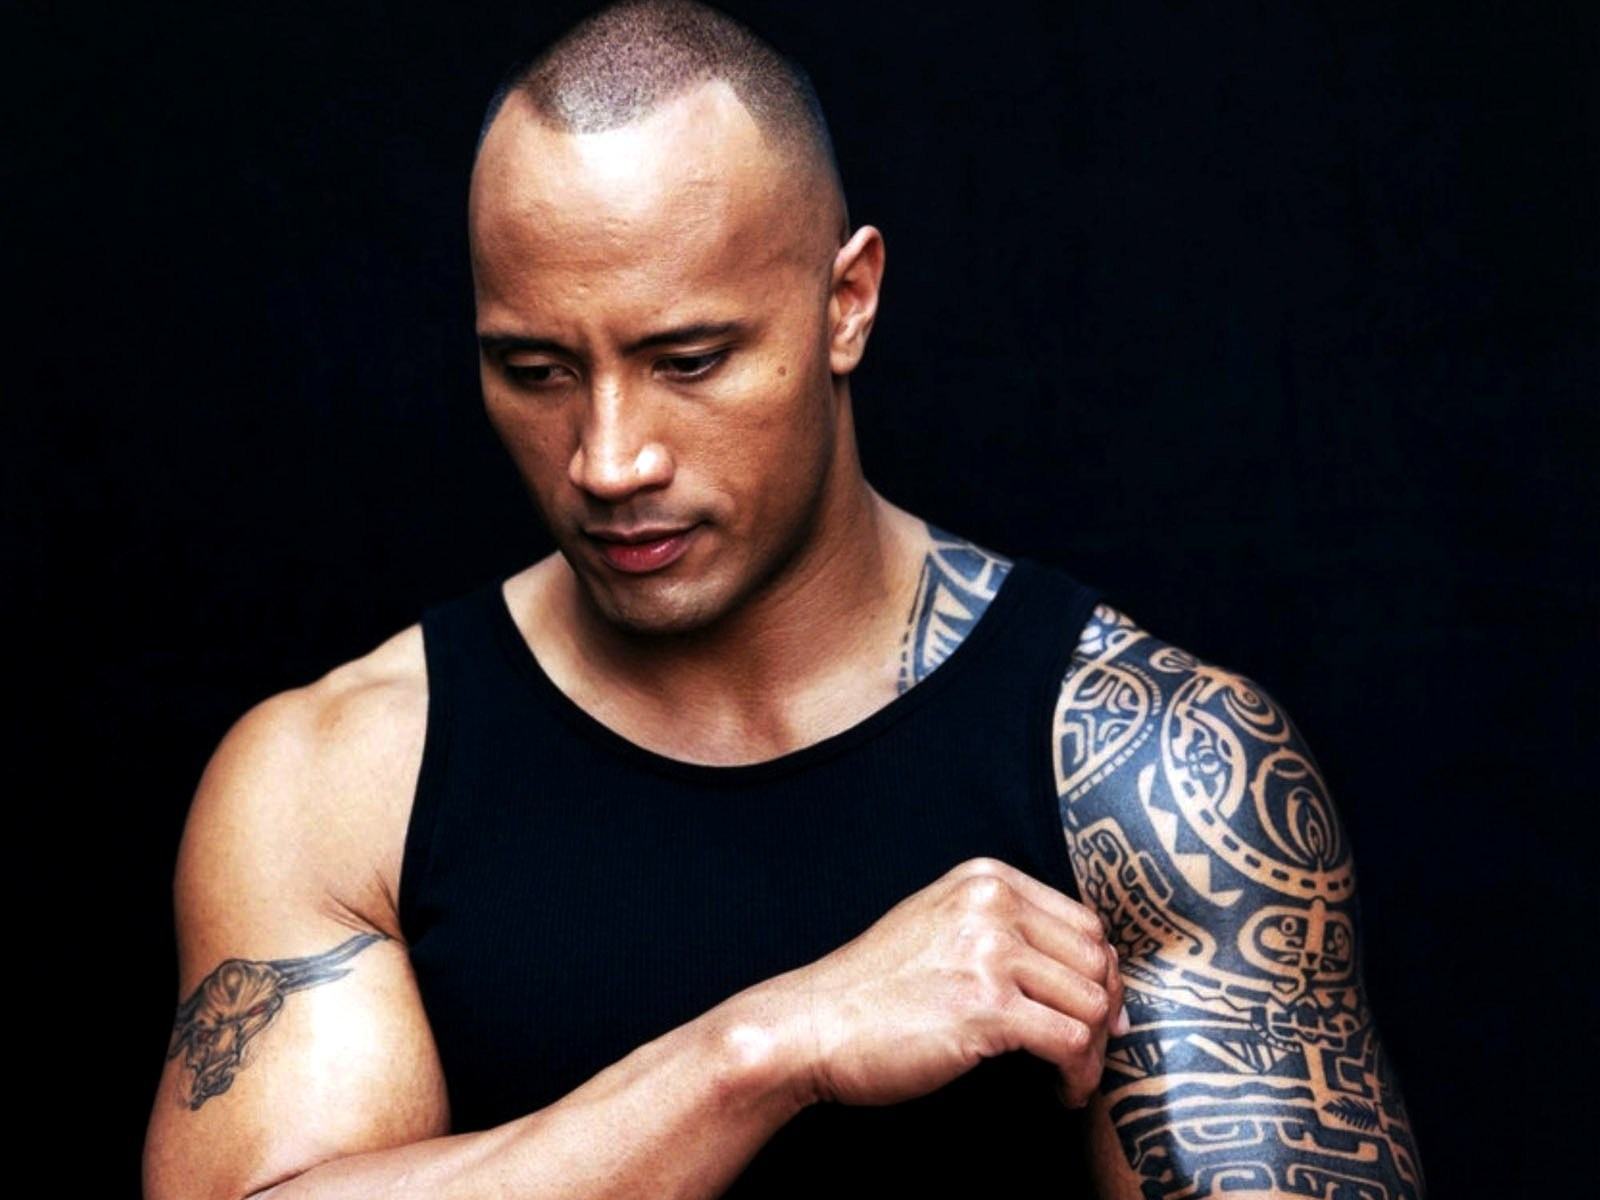 Yakuza Tattoo On His Arm Wallpapers And Images - Dwayne Johnson , HD Wallpaper & Backgrounds